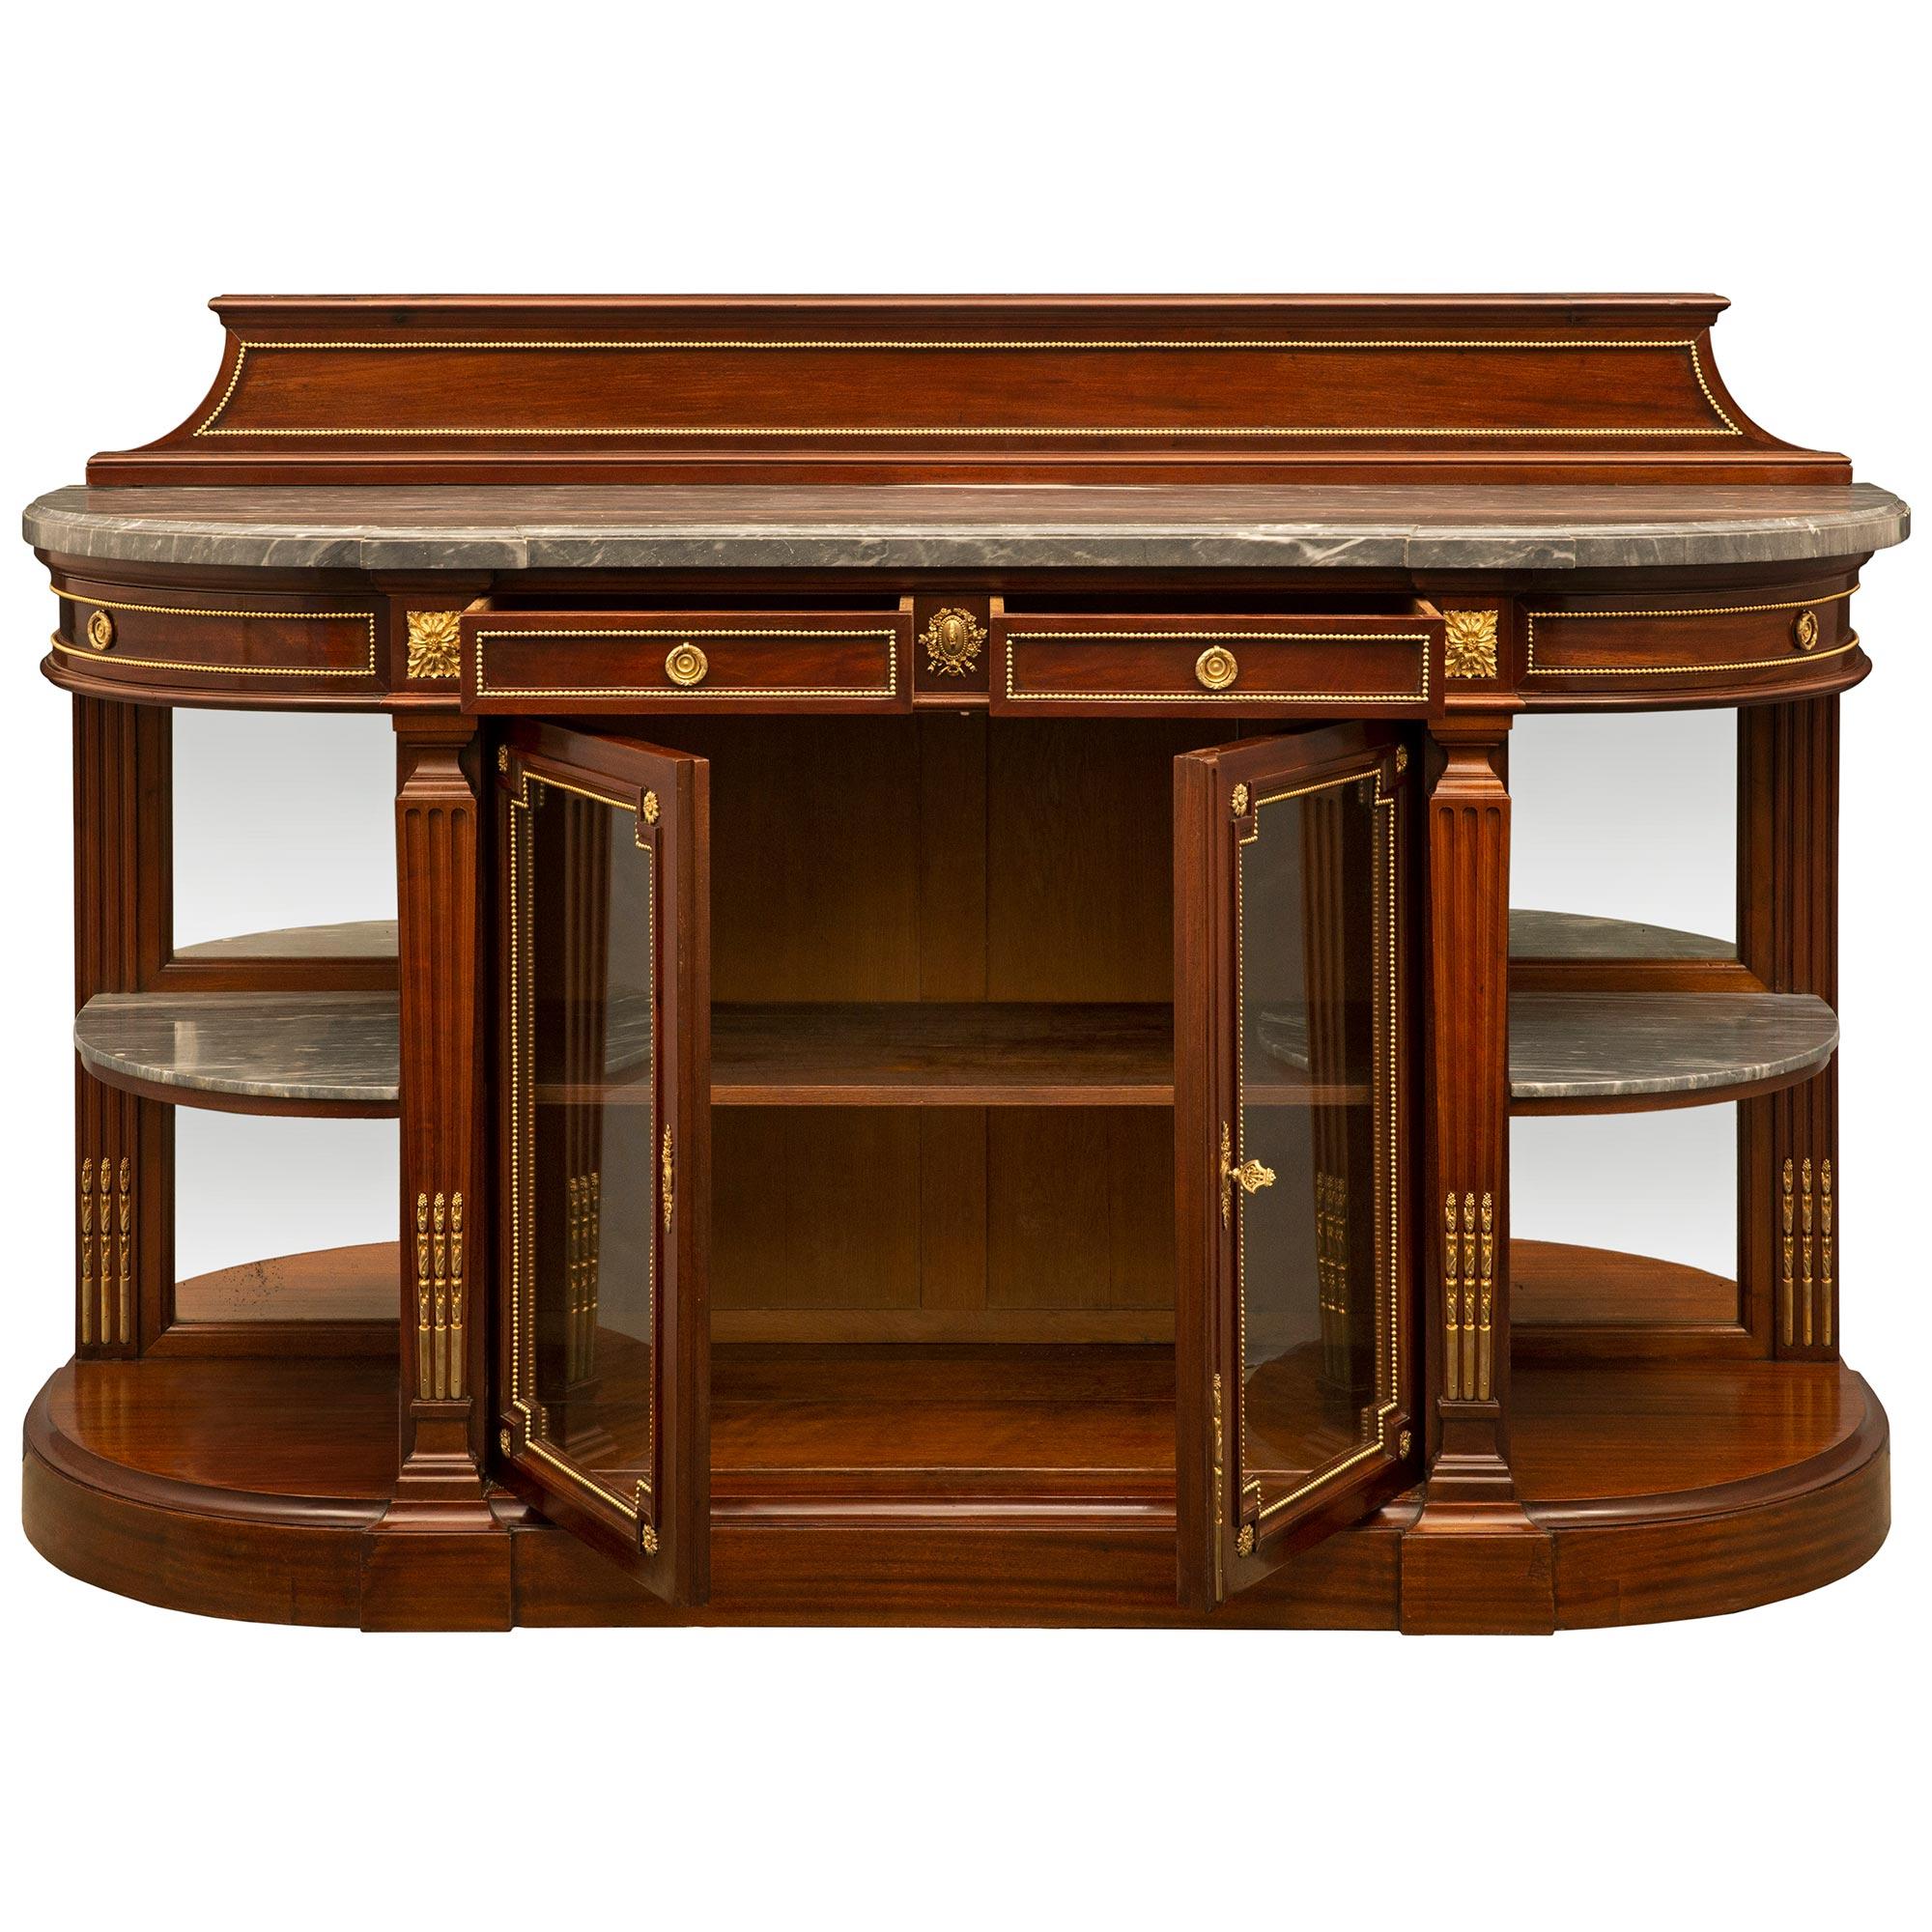 A superb and high quality French mid 19th century Louis XVI st. mahogany buffet. The buffet is raised on a demi lune base with four tapered reeded columns with ormolu chandelles supporting the frieze. Two central mahogany doors with the original